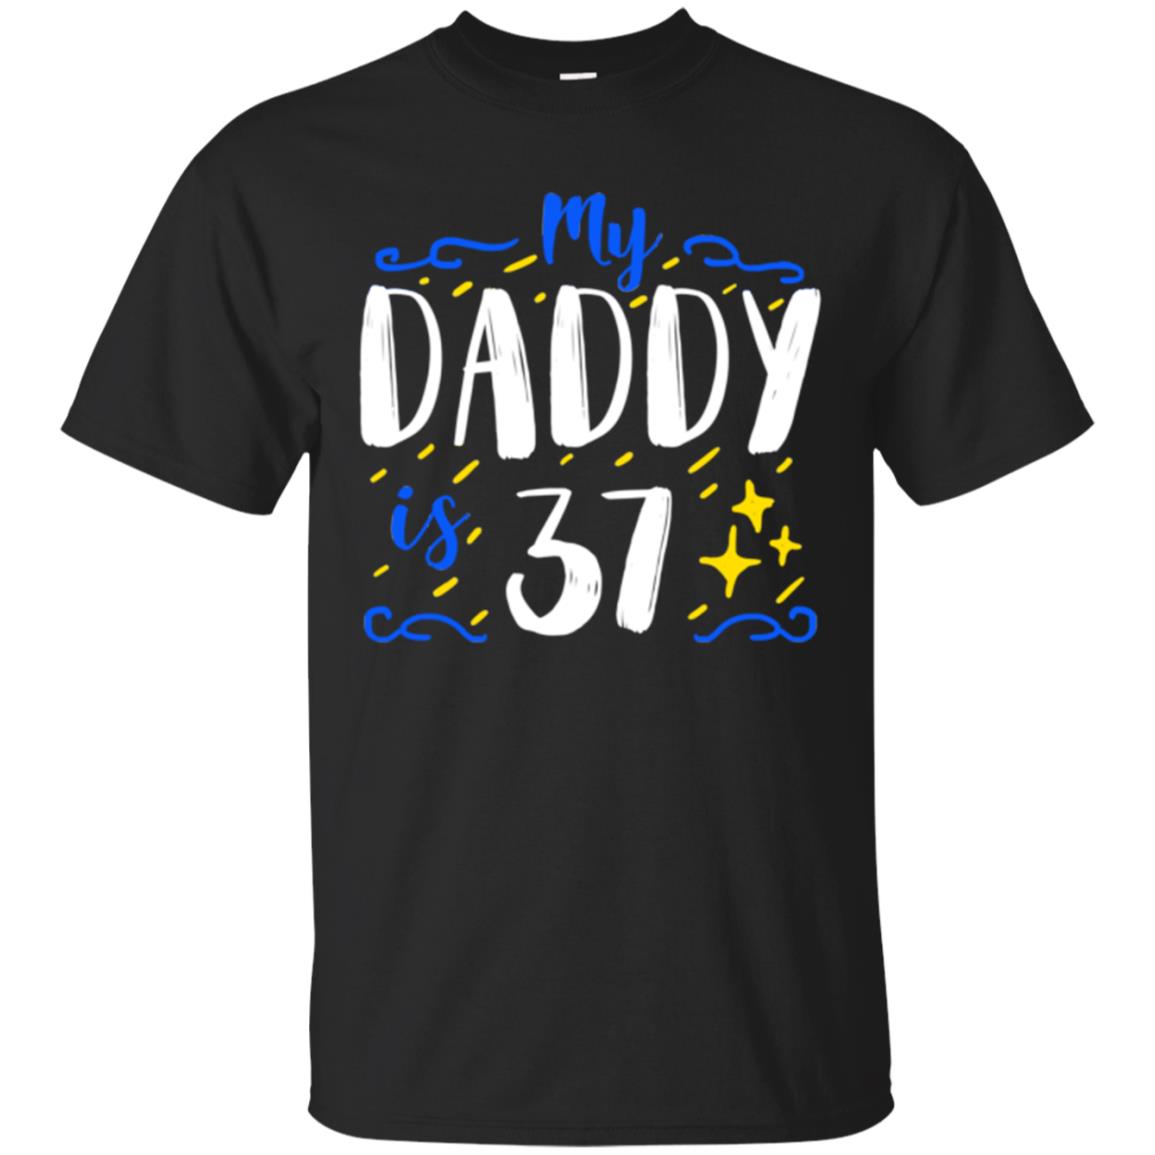 My Daddy Is 37 37th Birthday Daddy Shirt For Sons Or DaughtersG200 Gildan Ultra Cotton T-Shirt